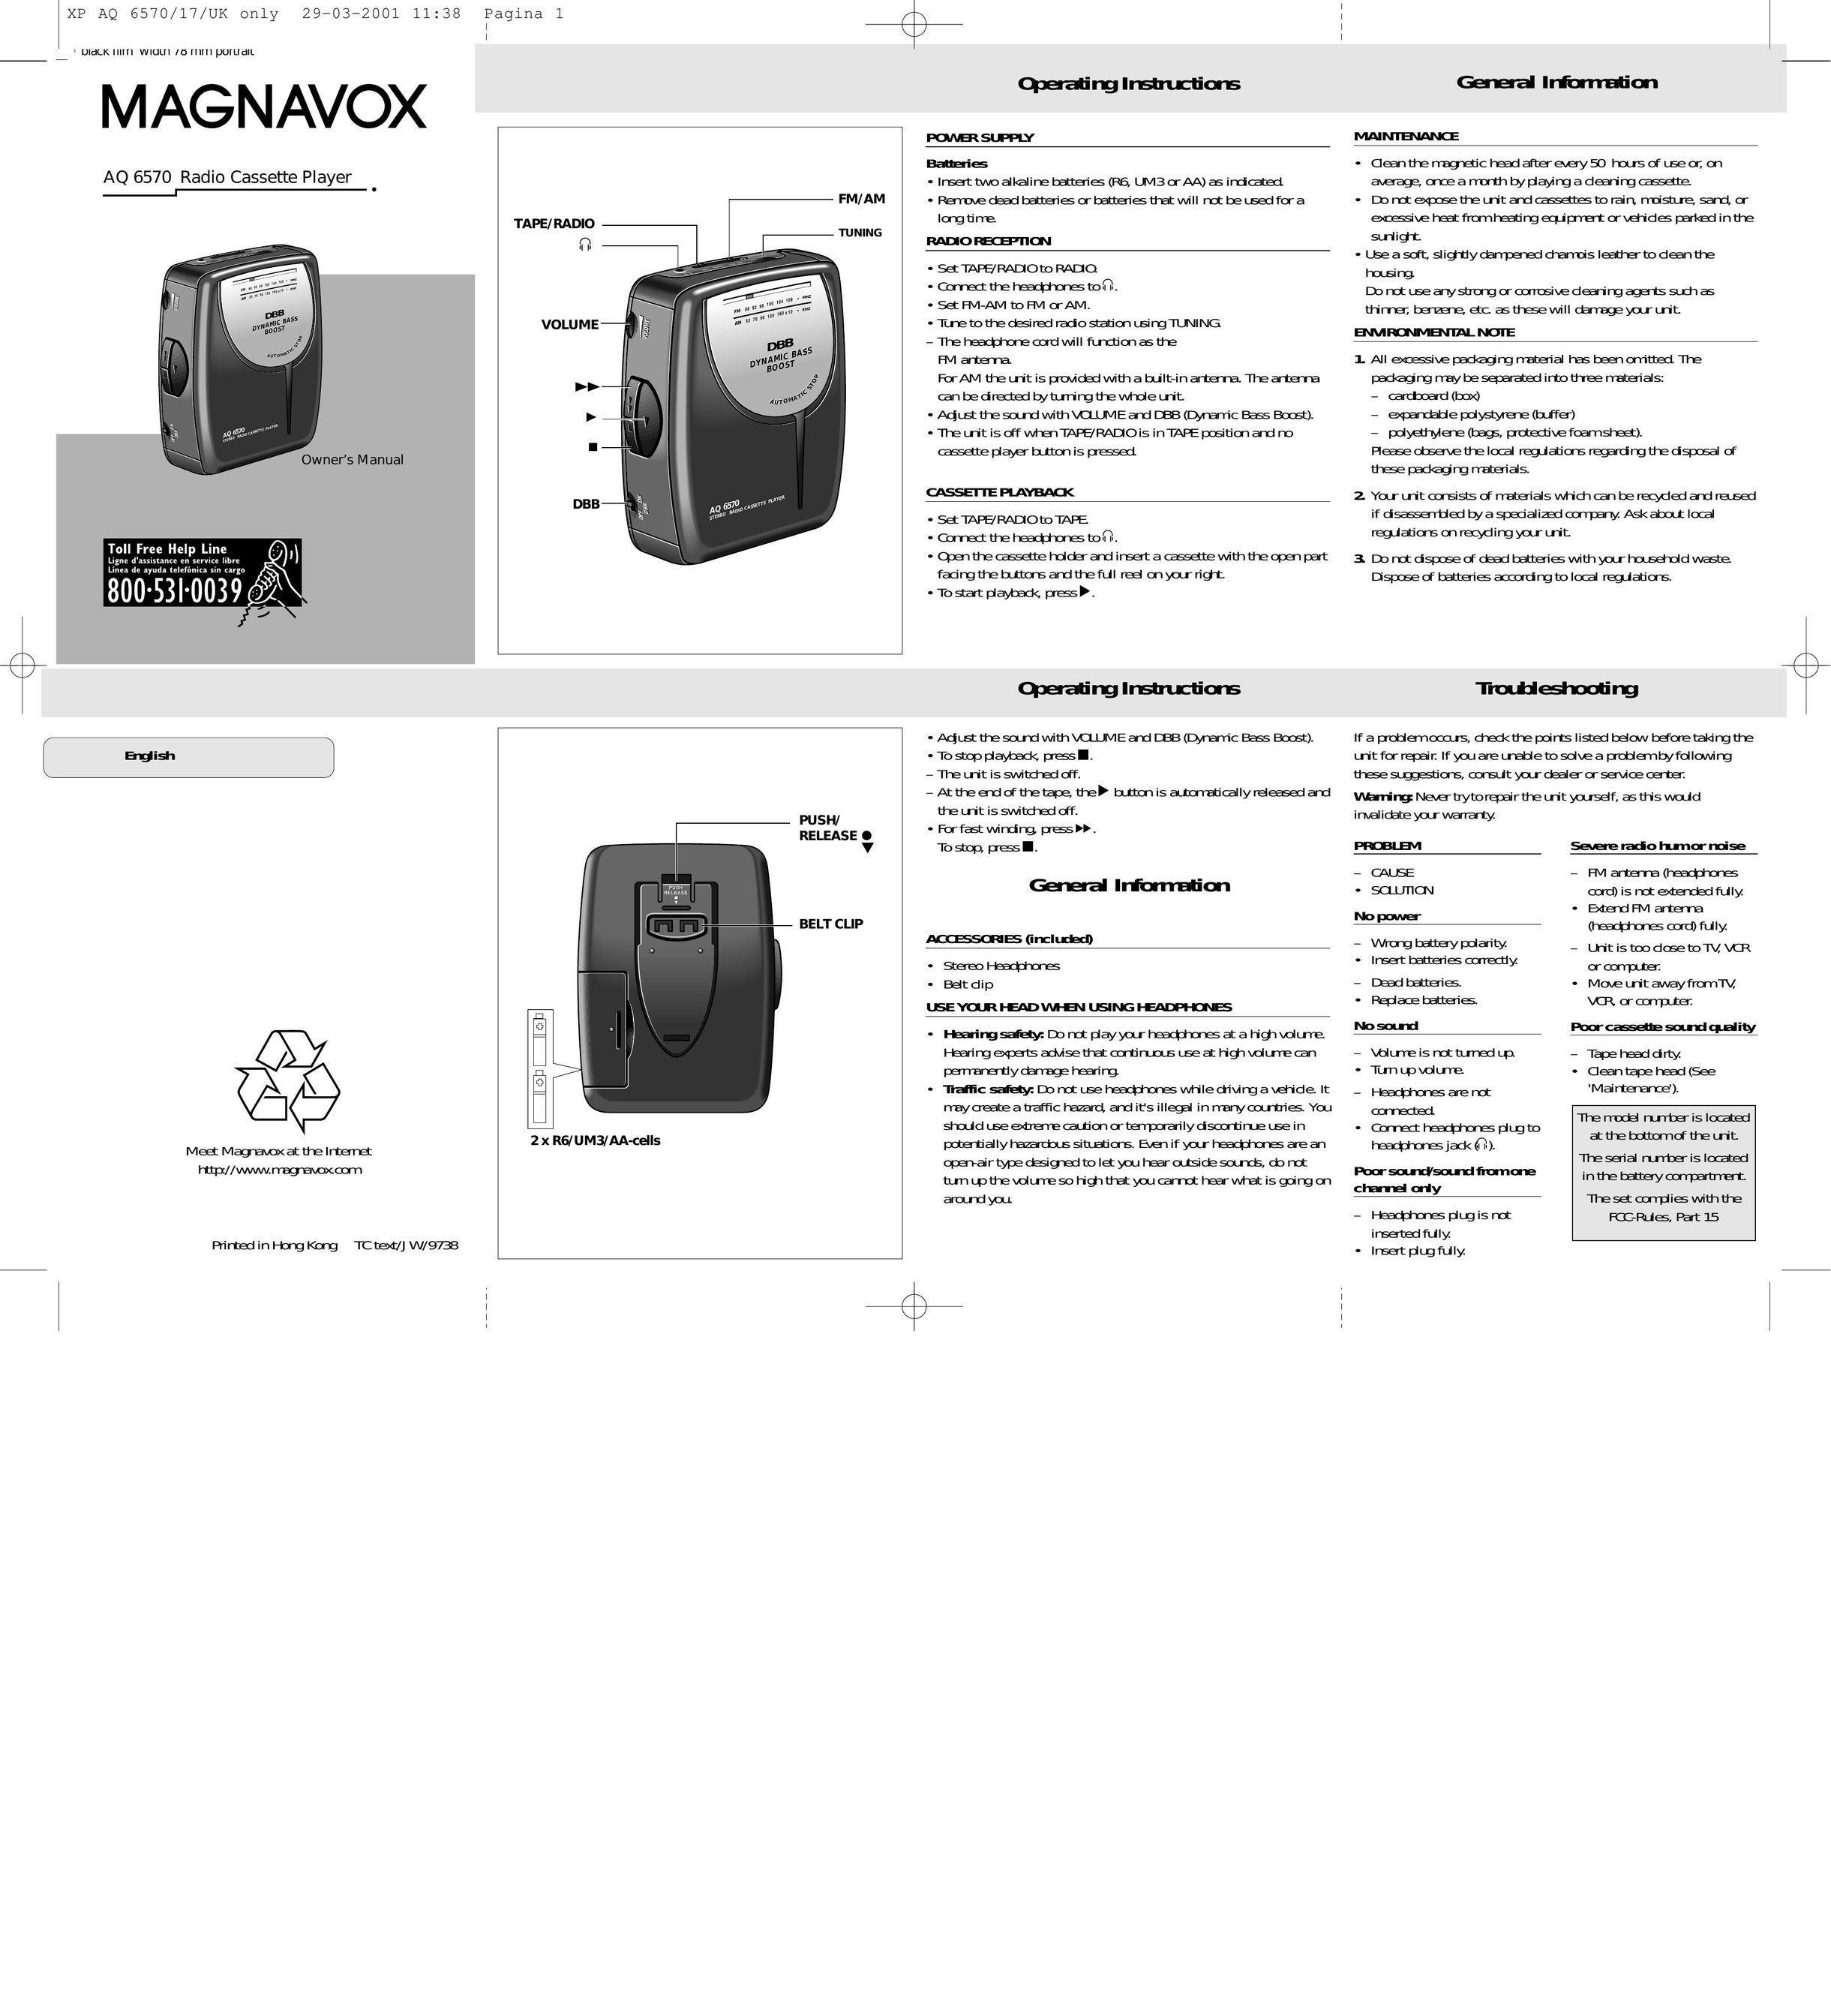 Magnavox AQ 6570 Cassette Player User Manual (Page 1)